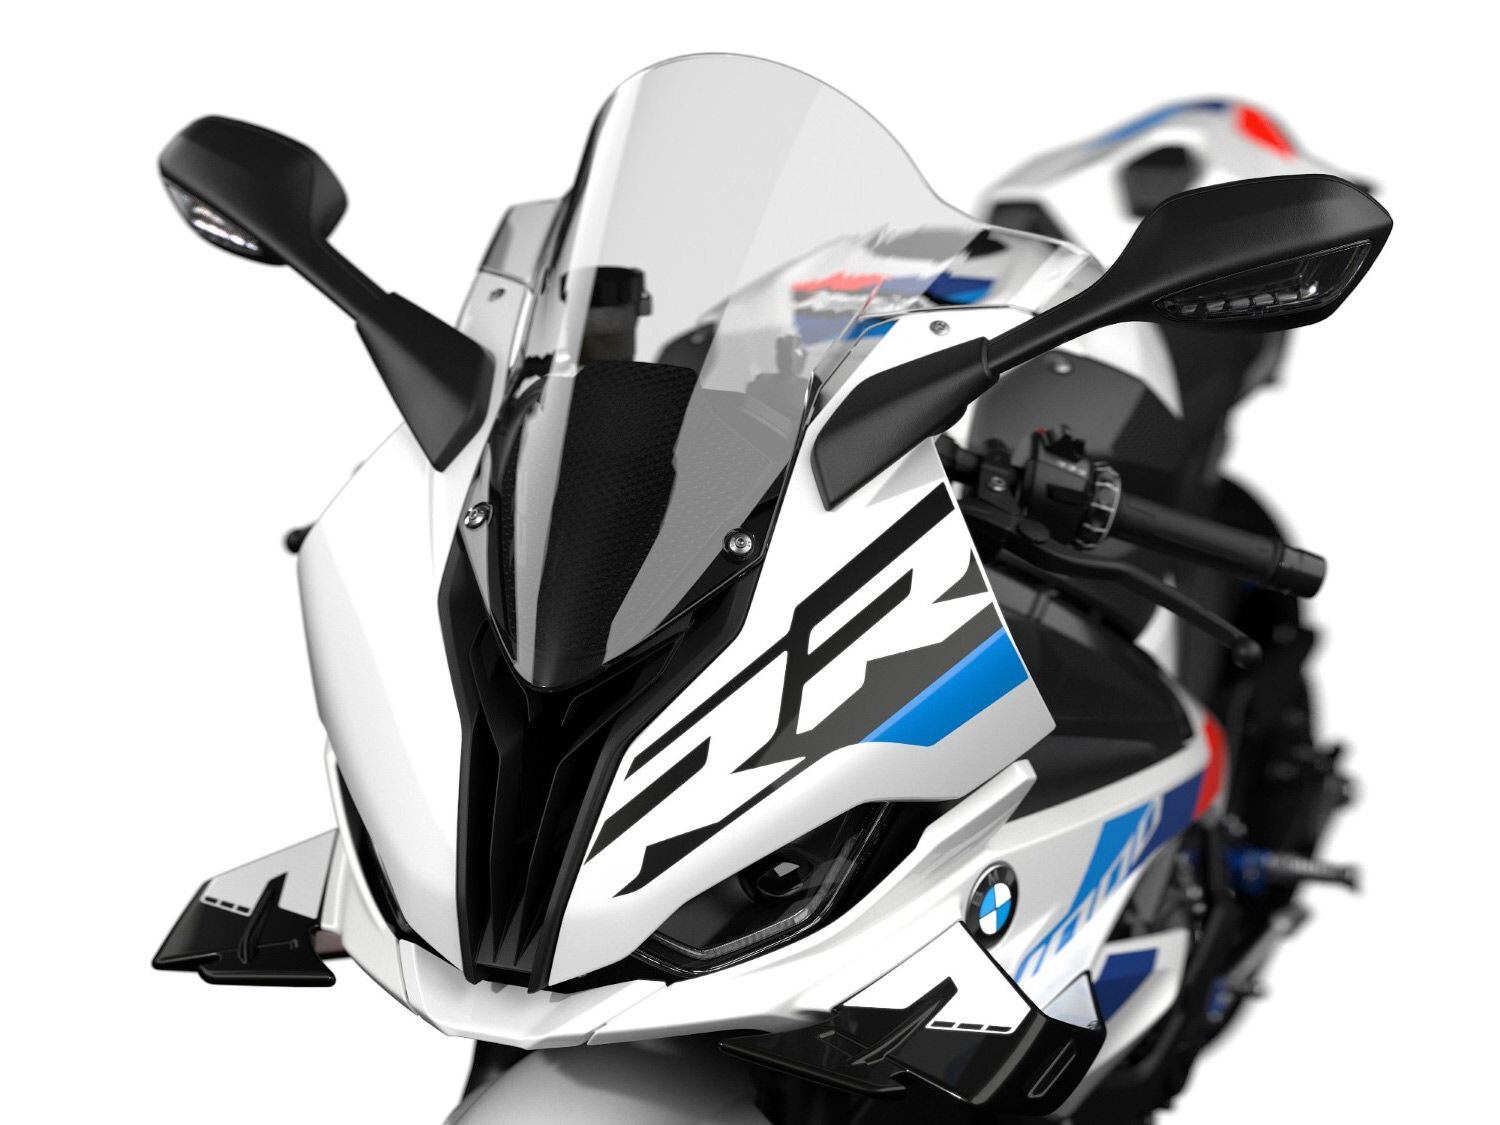 M 1000 RR–inspired winglets make their way down to the S 1000 RR.